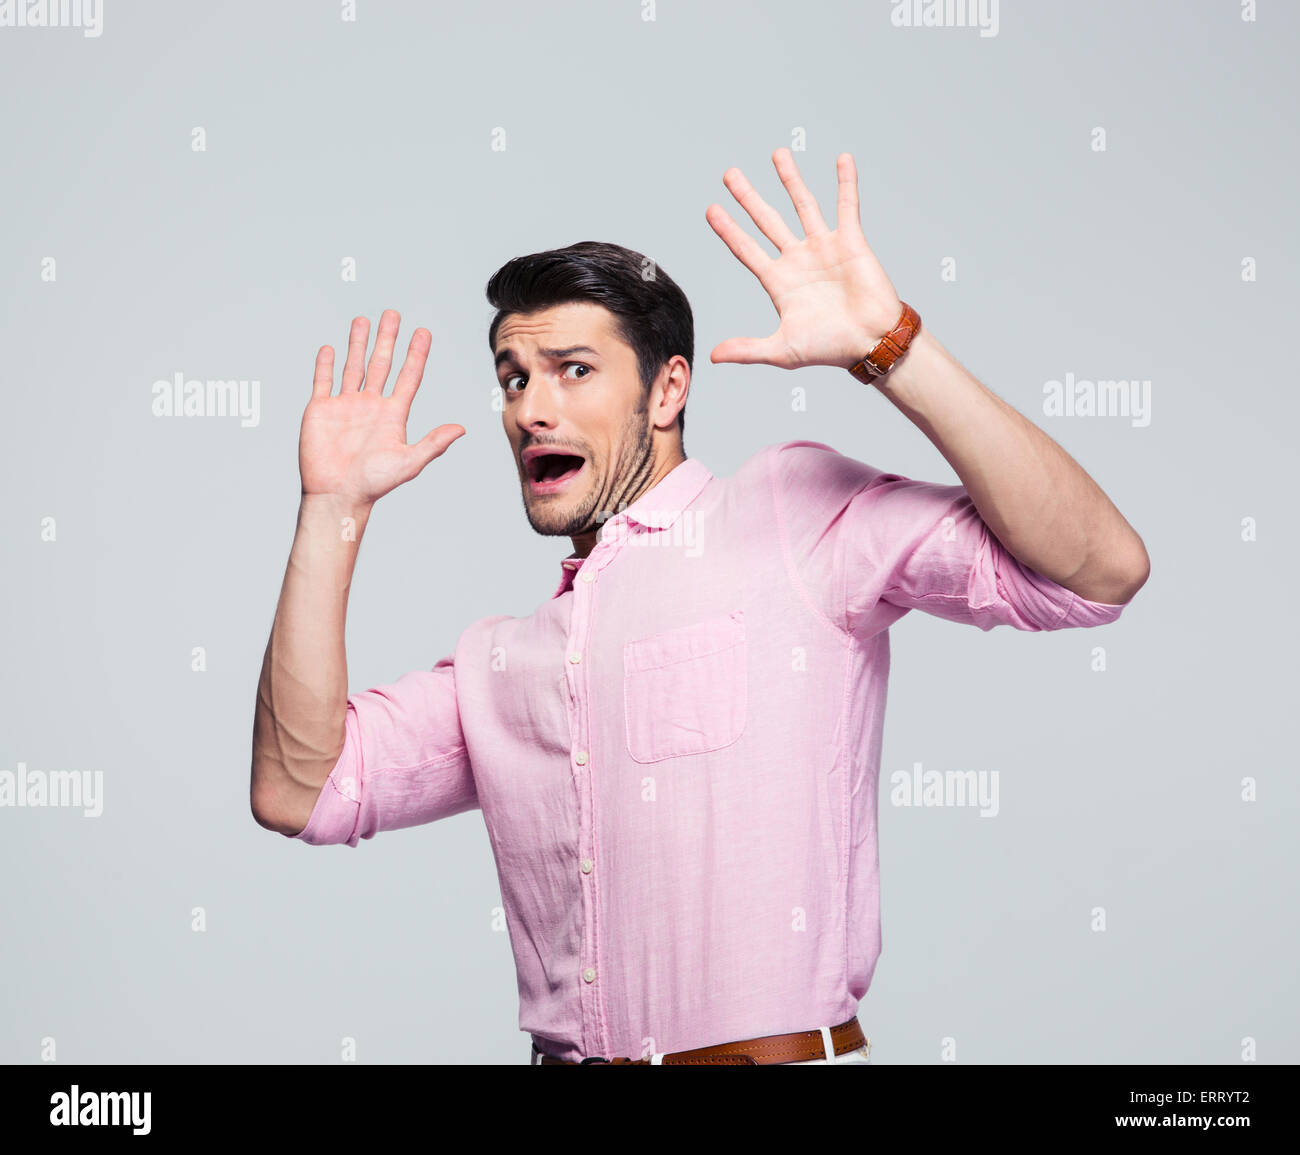 Scared and screaming businessman stop gesturing over gray background. Looking at camera Stock Photo